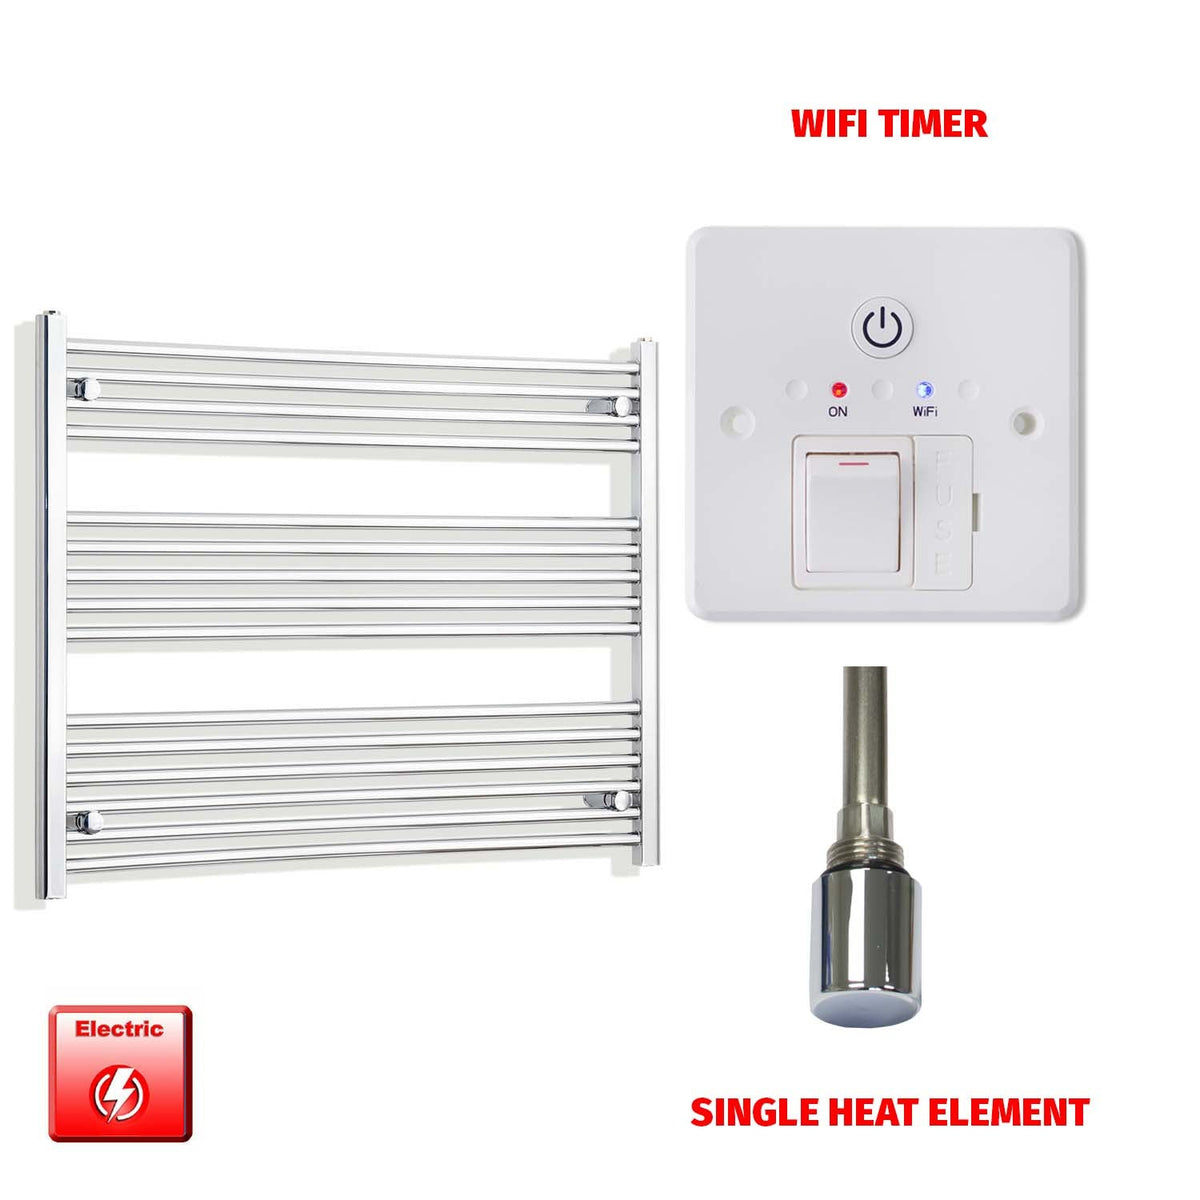 800mm High 950mm Wide Pre-Filled Electric Heated Towel Rail Radiator Straight Chrome Single heat element Wifi timer